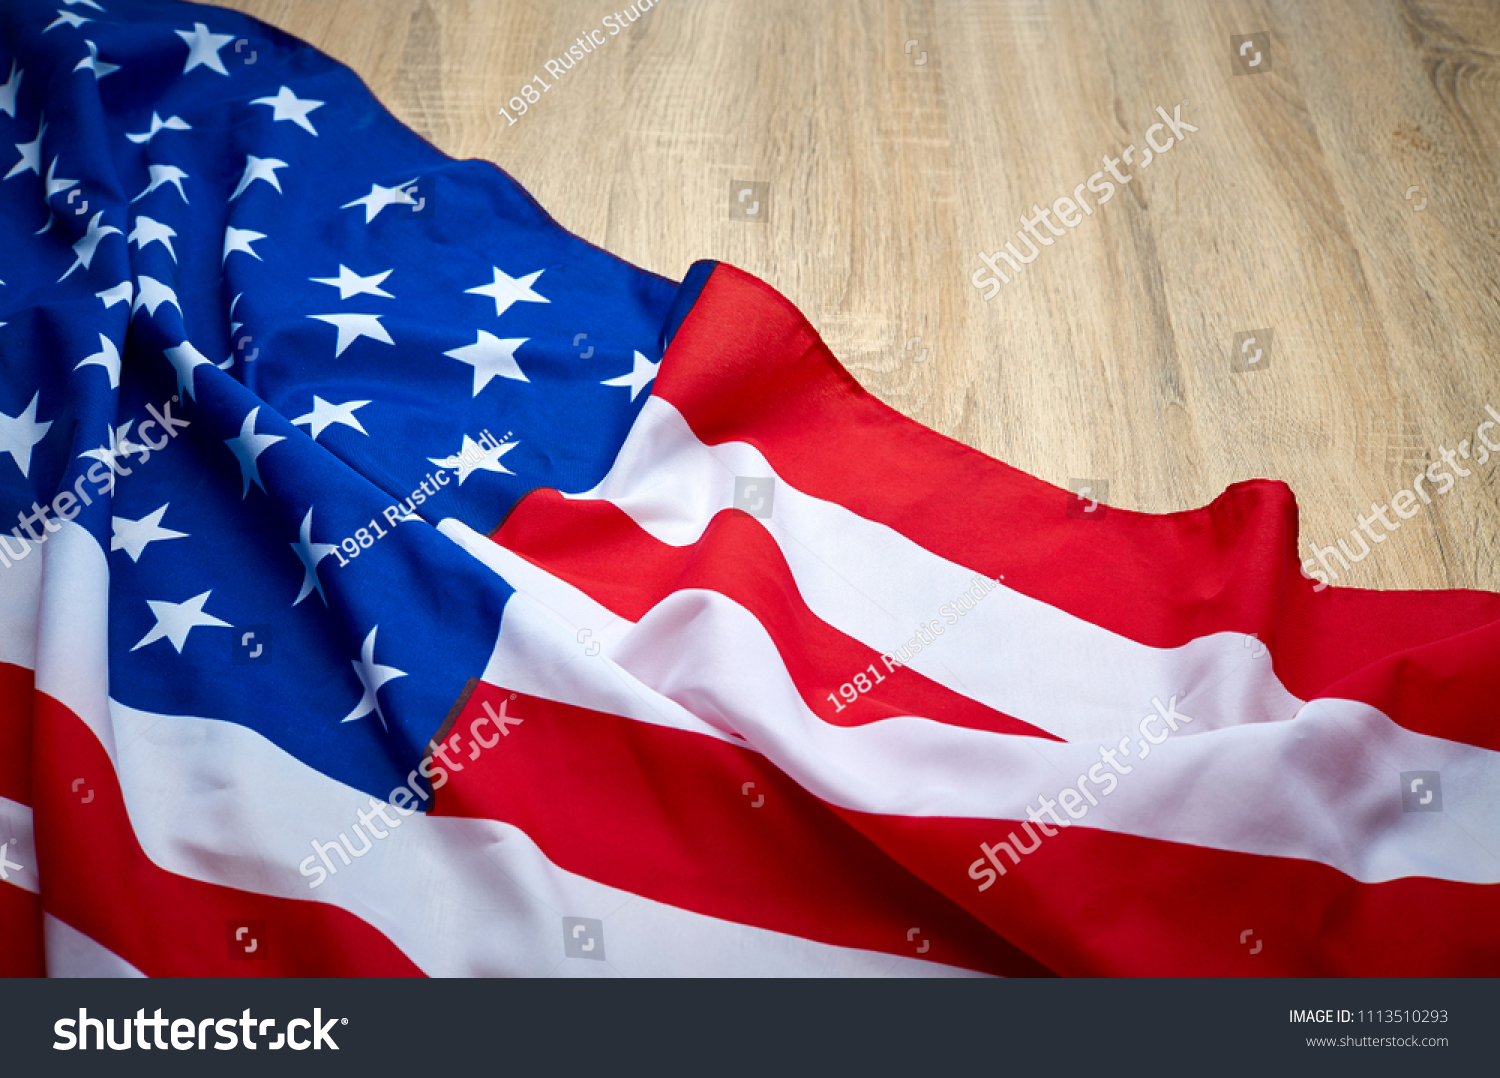 American flag wooden background.The Flag Of The United States Of America. The place to advertise, template.The view from the top. #1113510293